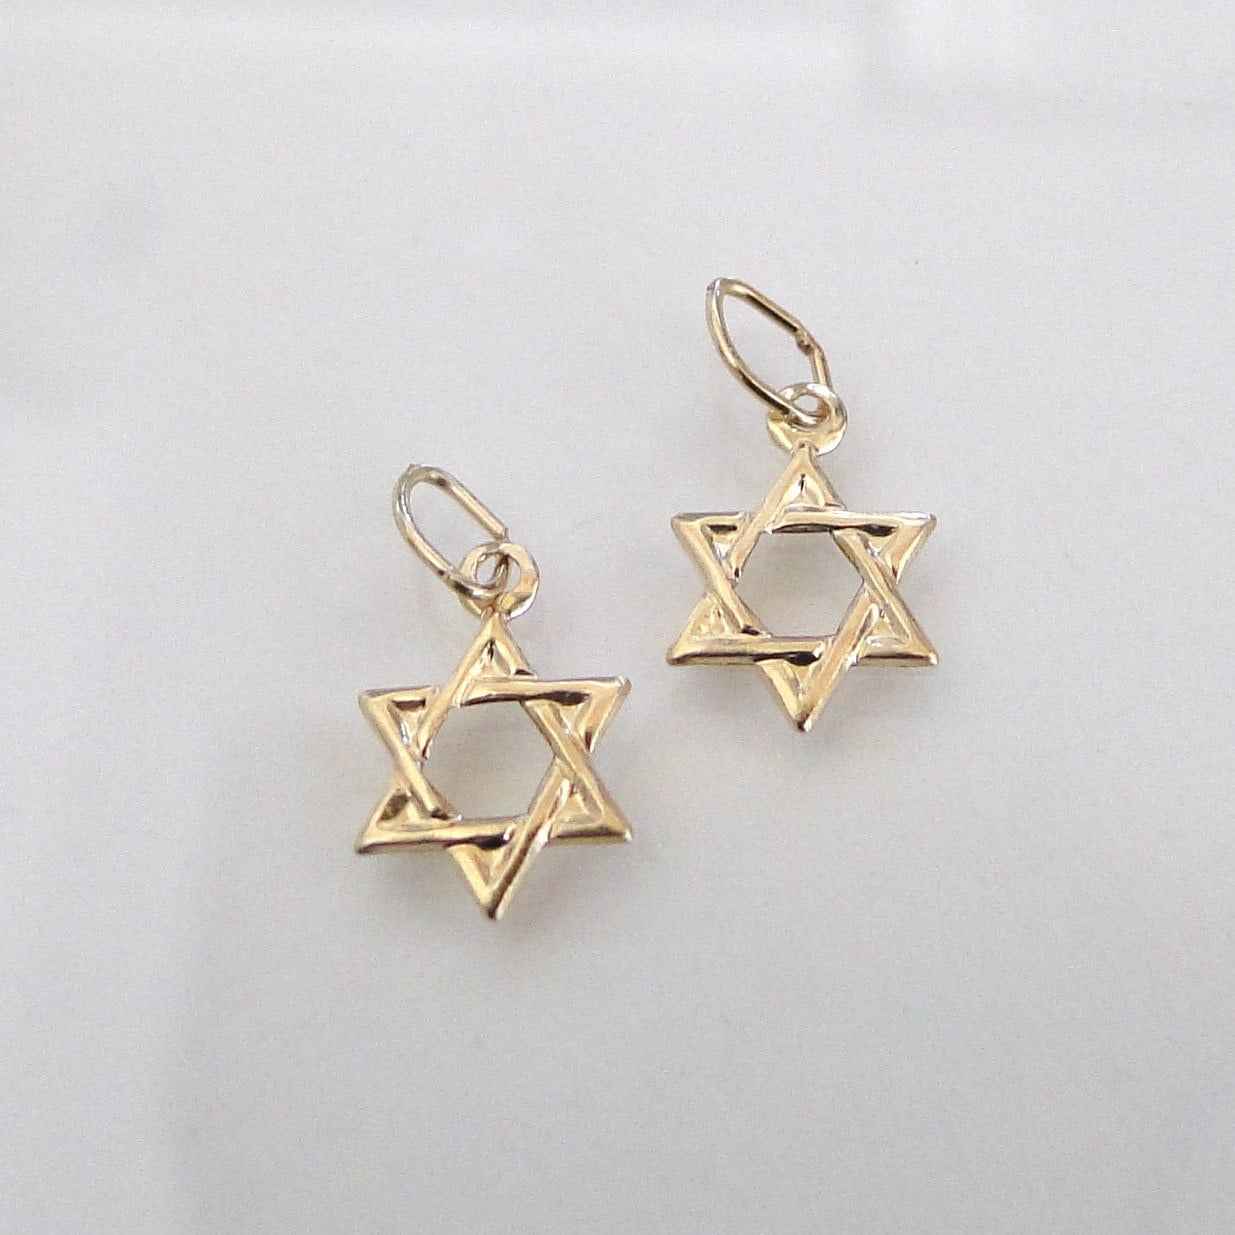 Solid Gold Star Stud Earring, Flat Back Earrings, Nap Earrings, Gold  Sleeper Earrings, 14K Yellow Gold, 14K White Gold – Valensole Jewelry